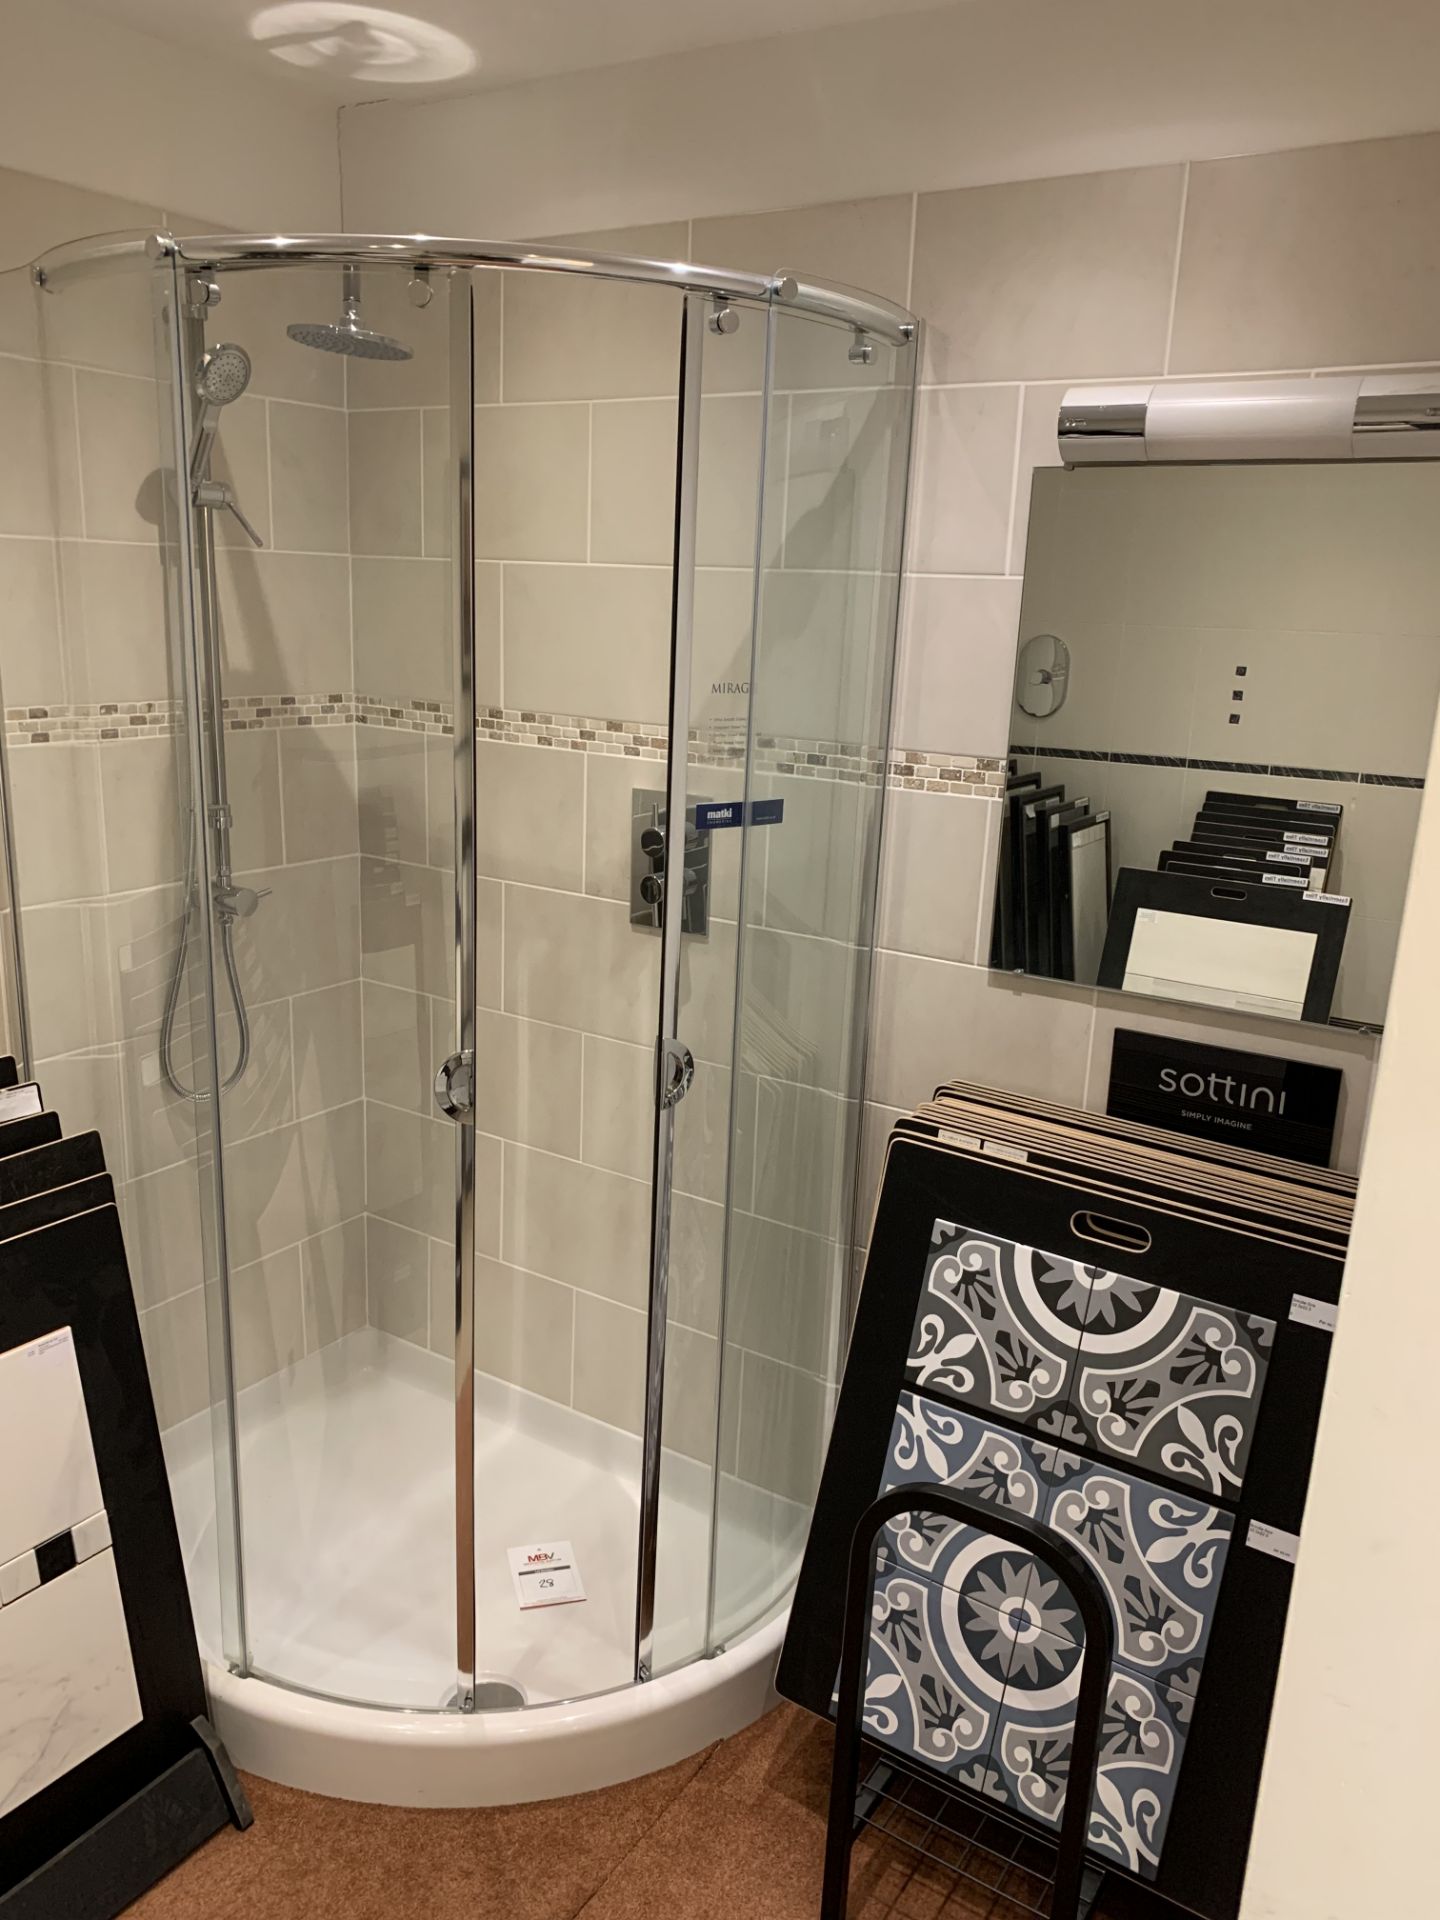 Display curved corner shower cubicle and tray & mirror